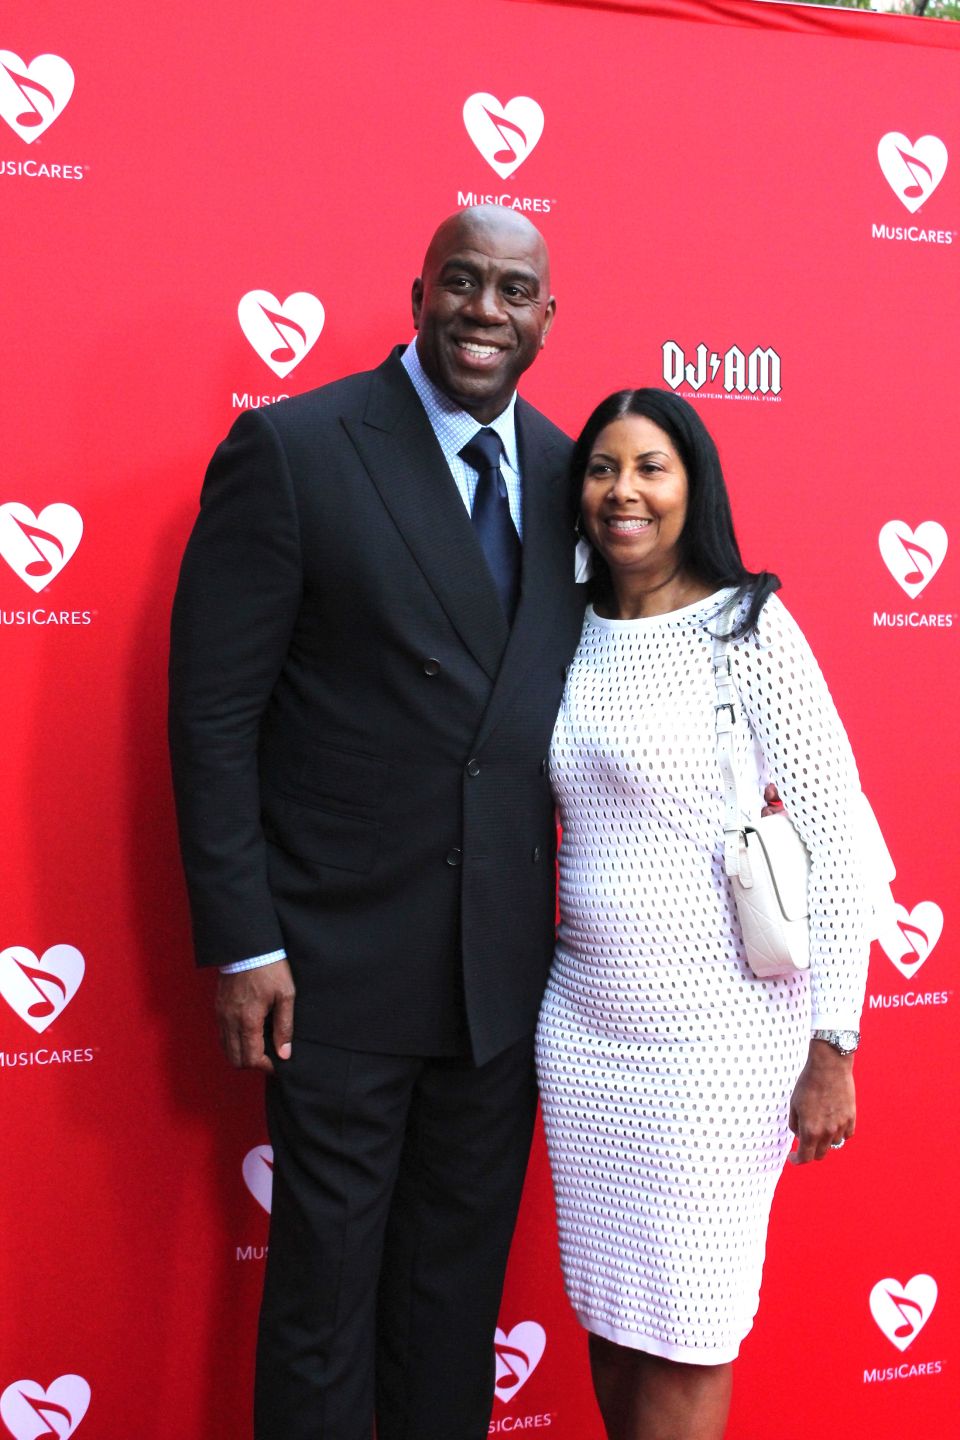 05/19/2016 - Magic and Cookie Johnson - 12th Annual Musicares Map Fund Benefit Concert Honoring Smokey Robinson - Grammy Museum - Los Angeles, CA, USA - Keywords: Orientation: Portrait Face Count: 2 - - Photo Credit: Michele Marotta / PRPhotos.com - Contact (1-866-551-7827) - Portrait Face Count: 2